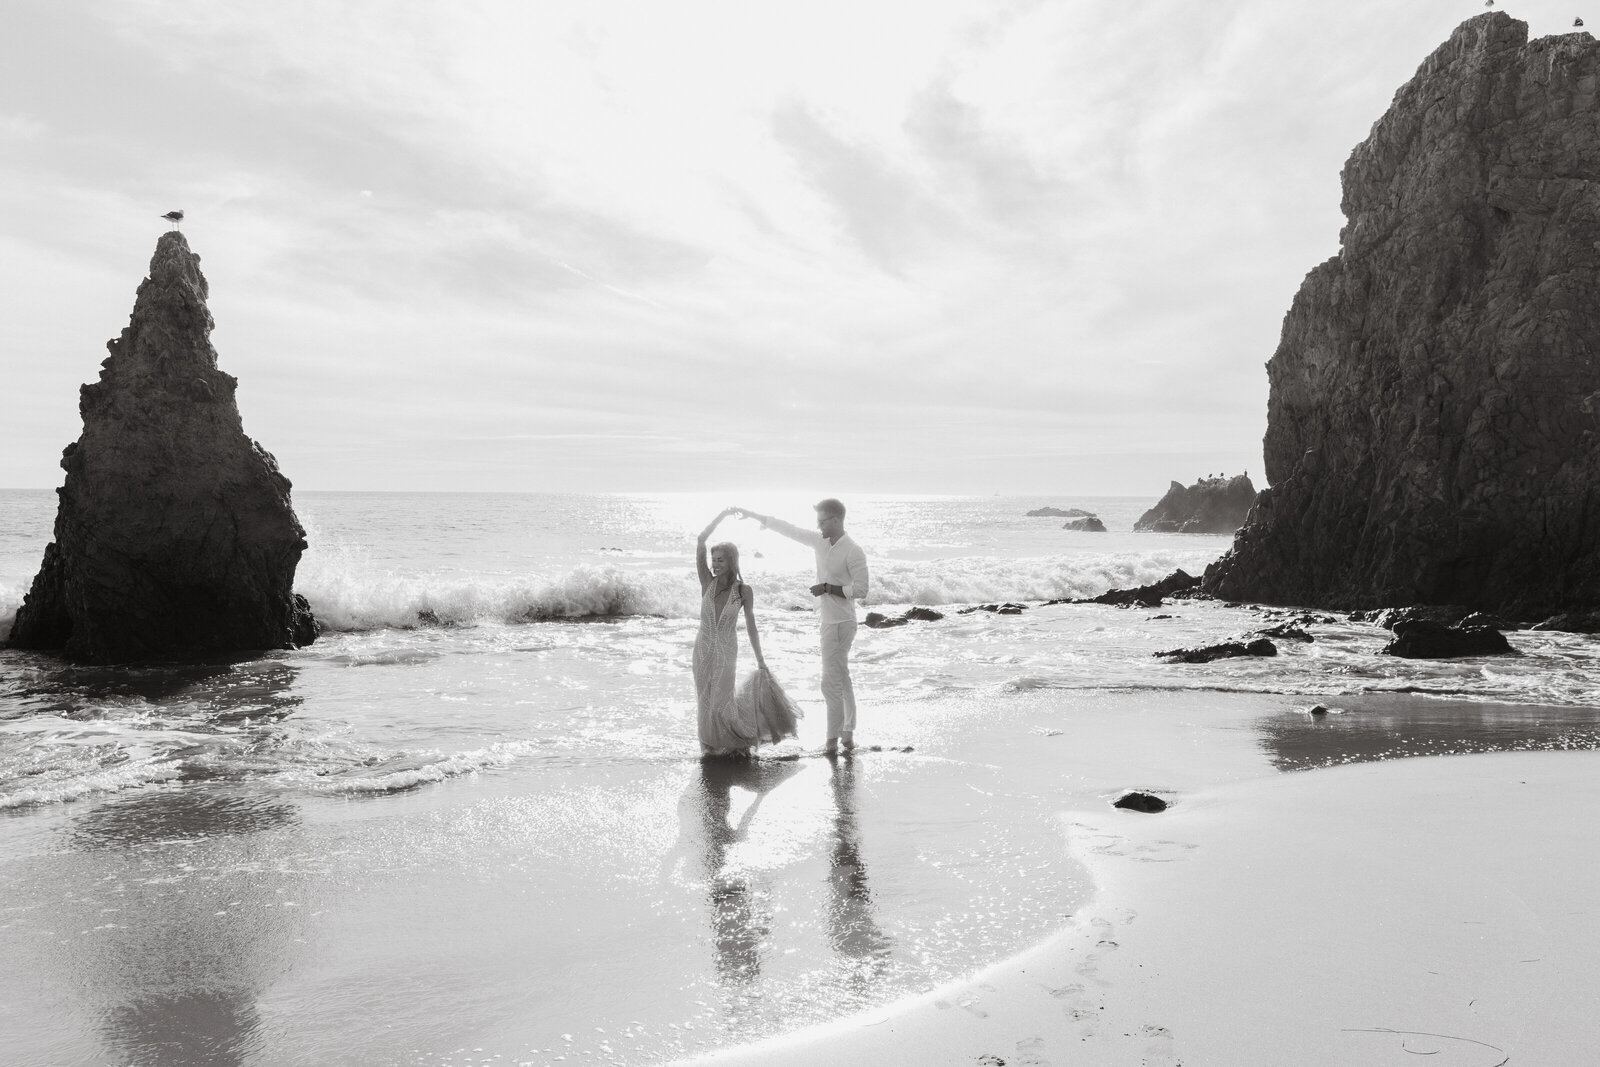 West Coast wedding dreams realized at El Matador Beach. Sunset portraits, ocean breezes, and timeless romance captured in black & white.